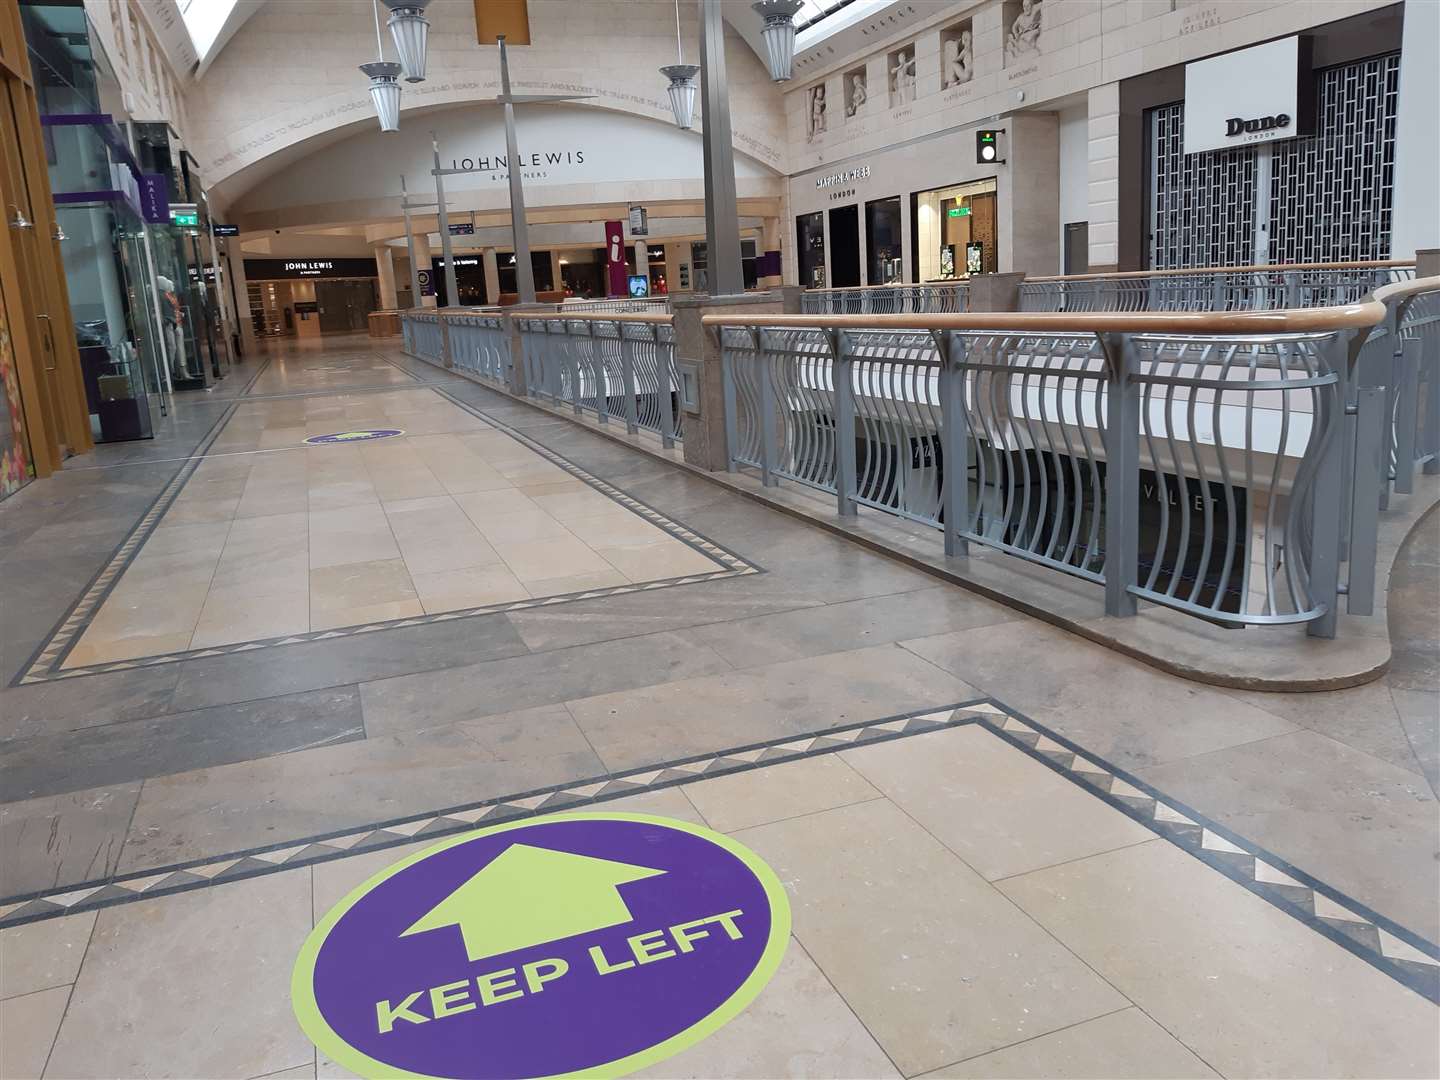 A man became the first to be charged with not wearing a mask at Bluewater